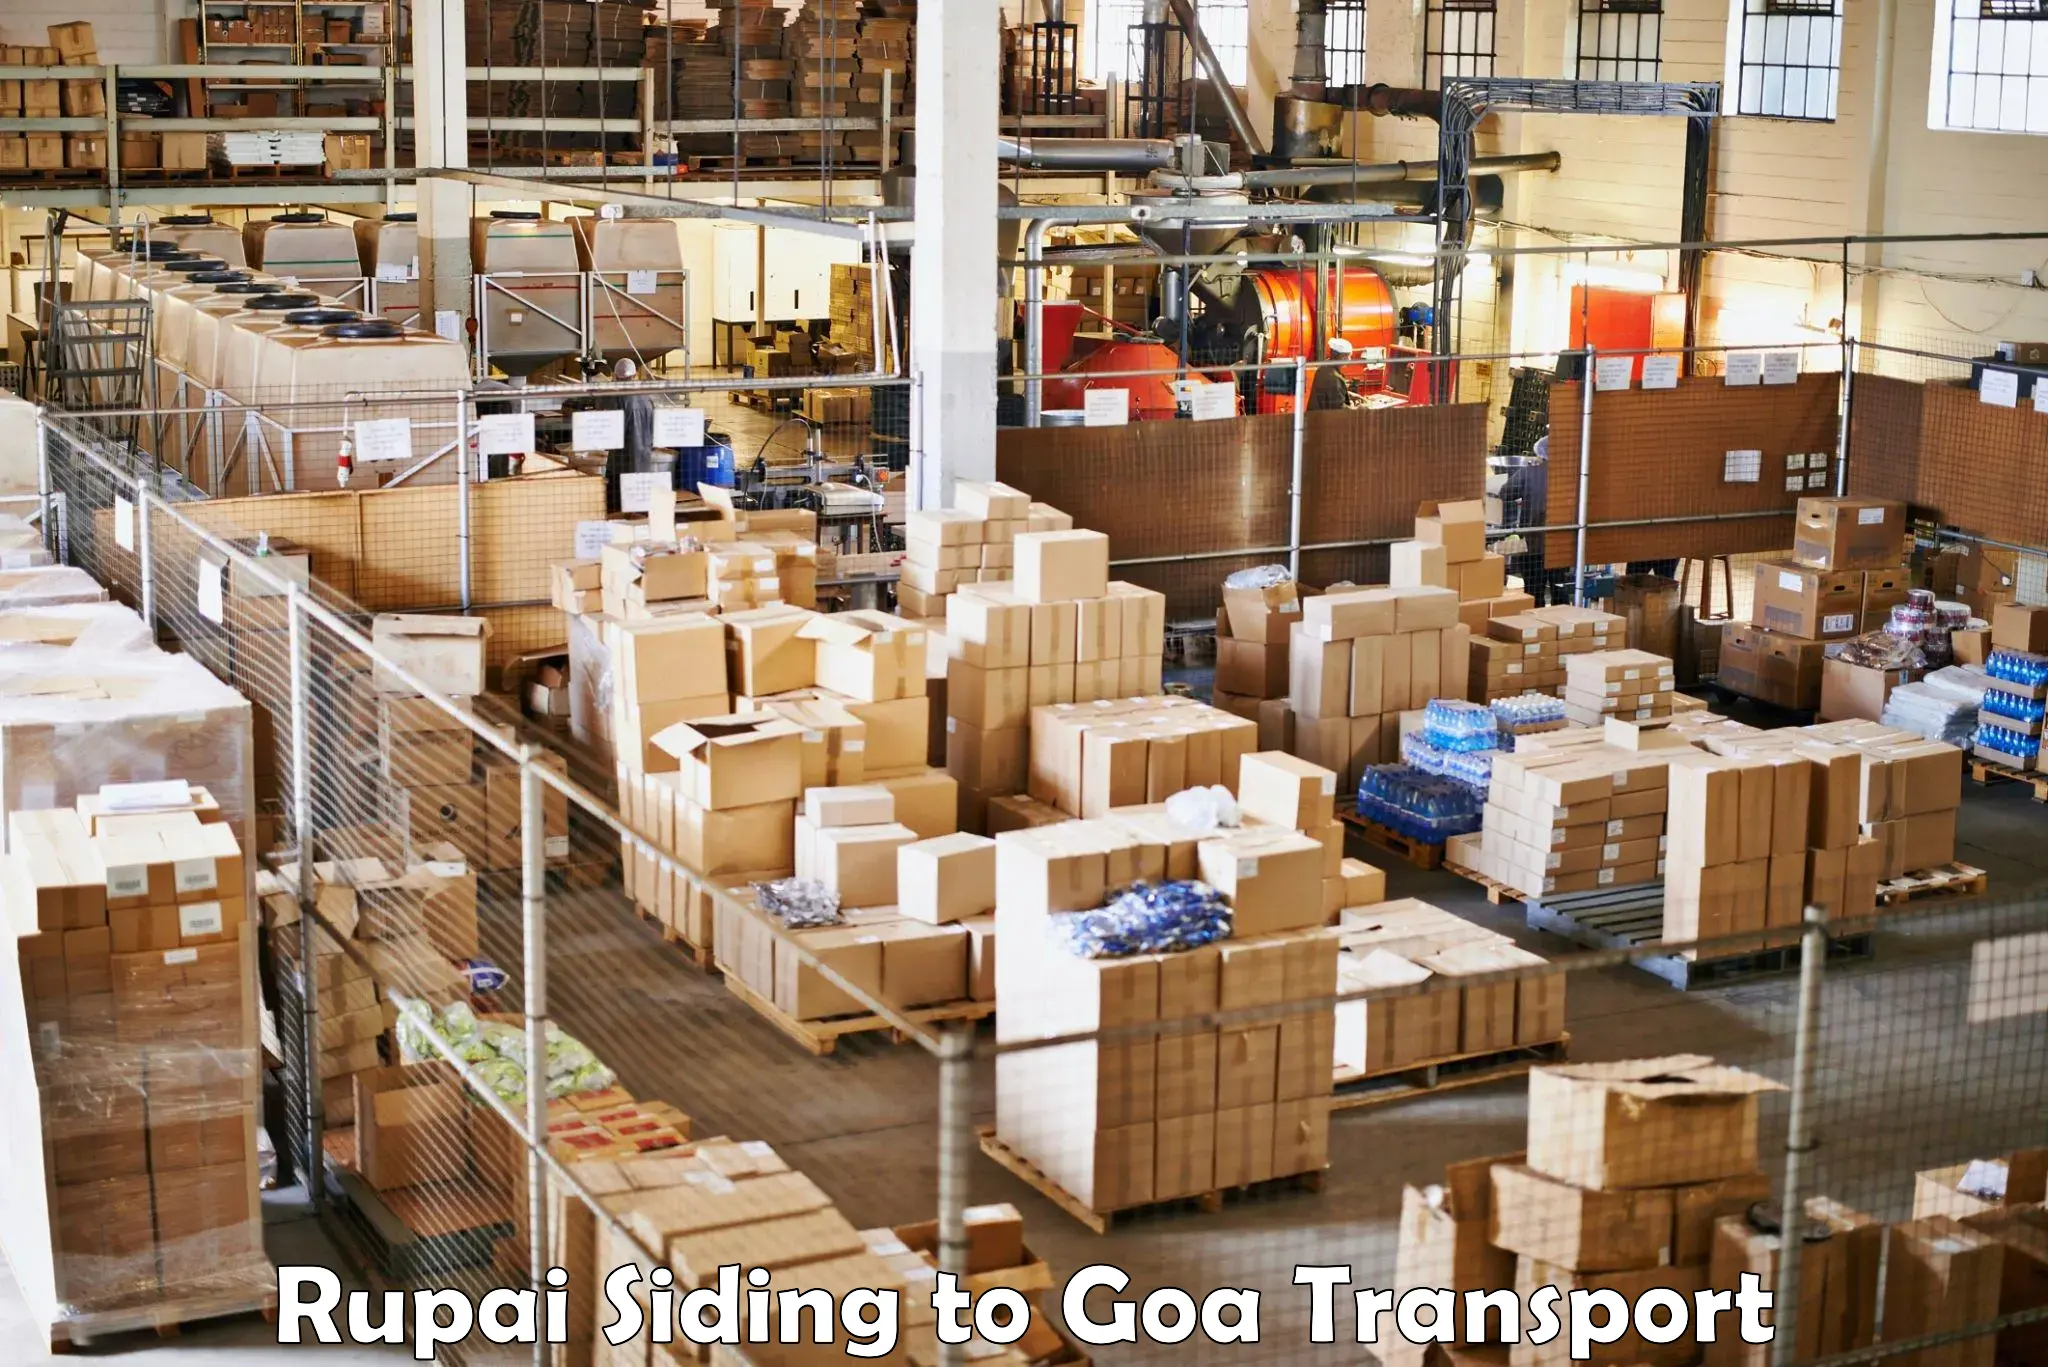 Part load transport service in India Rupai Siding to Goa